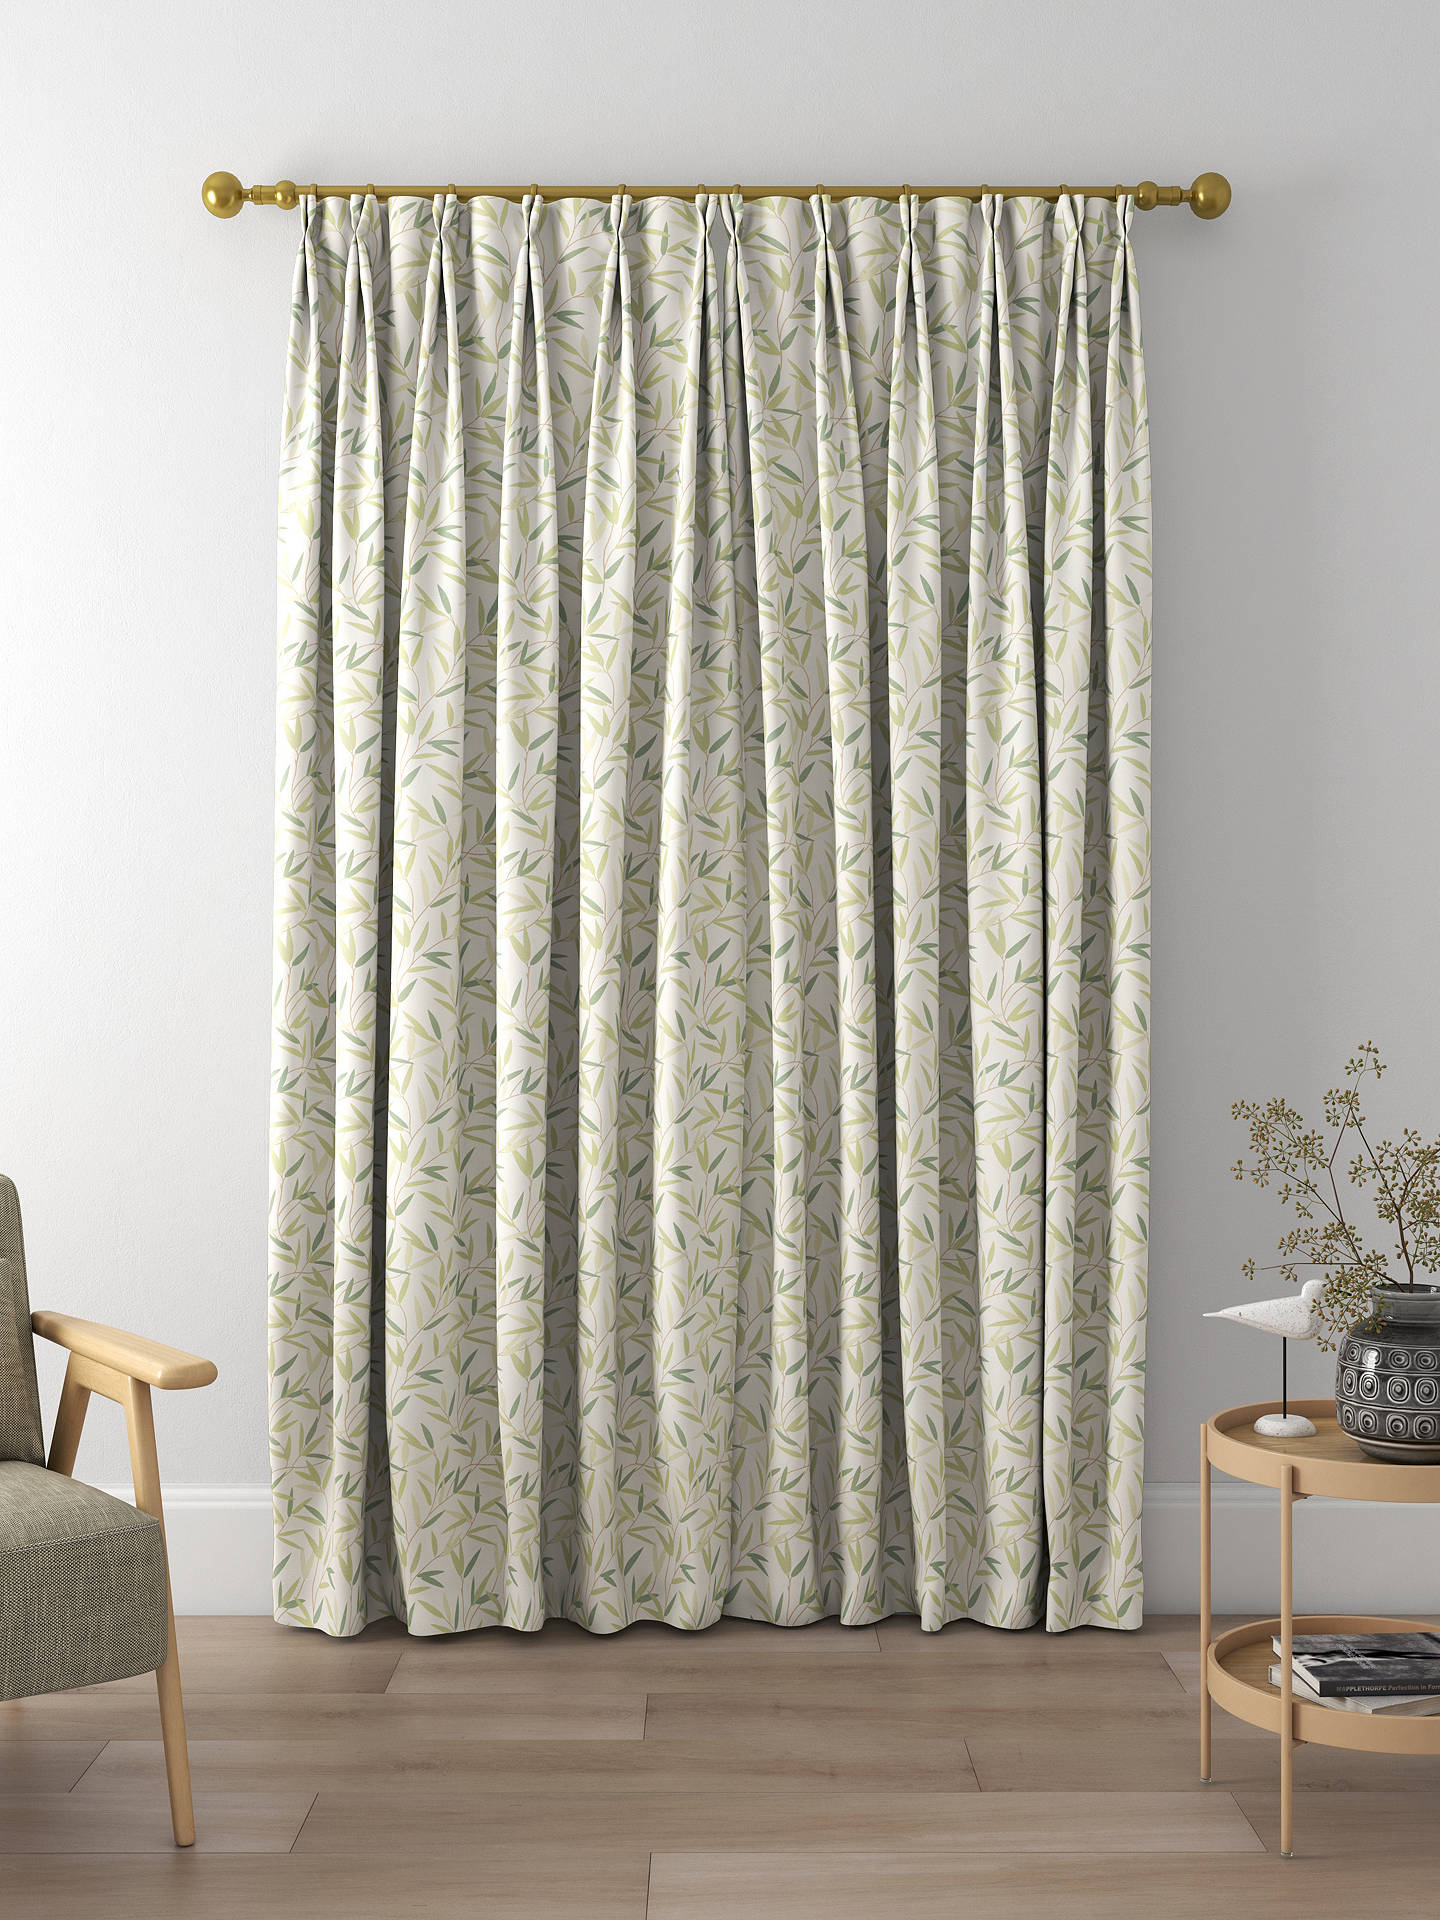 Laura Ashley Willow Leaf Made to Measure Curtains, Hedgerow